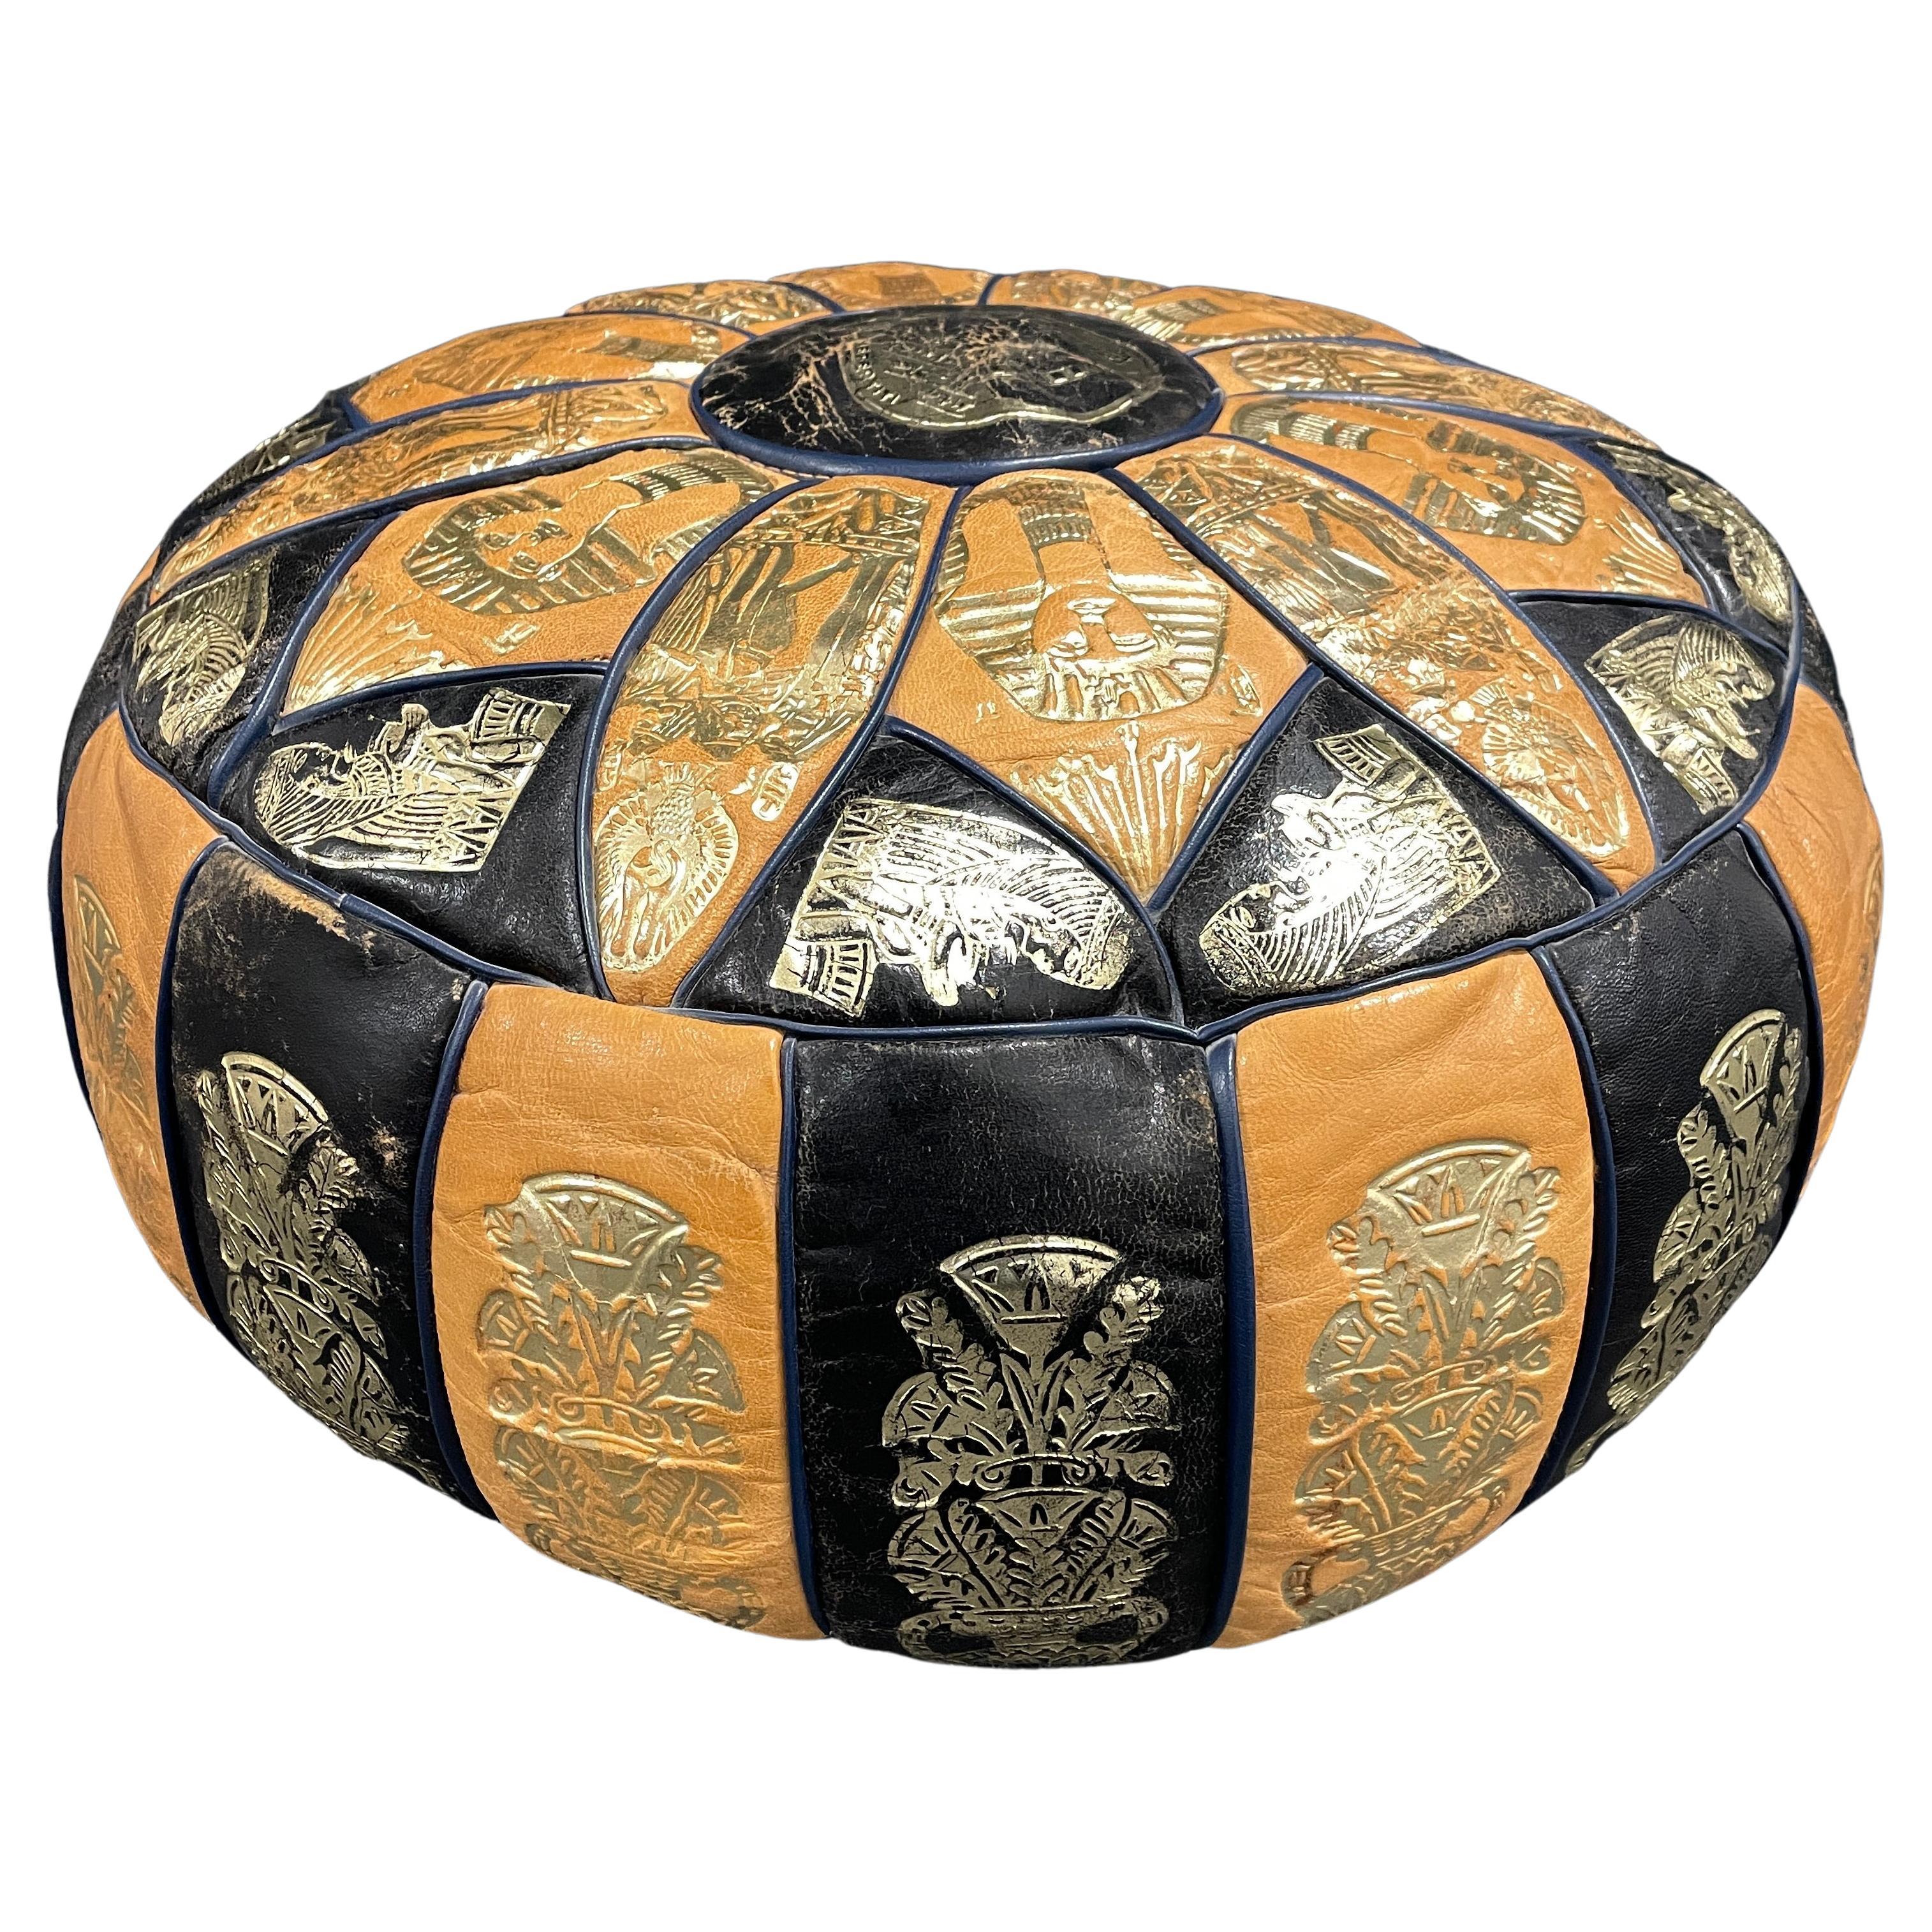 Egypt Pictured Pouf Ottoman Footrest Poof Pouffe Made of Leather, 1970s For Sale